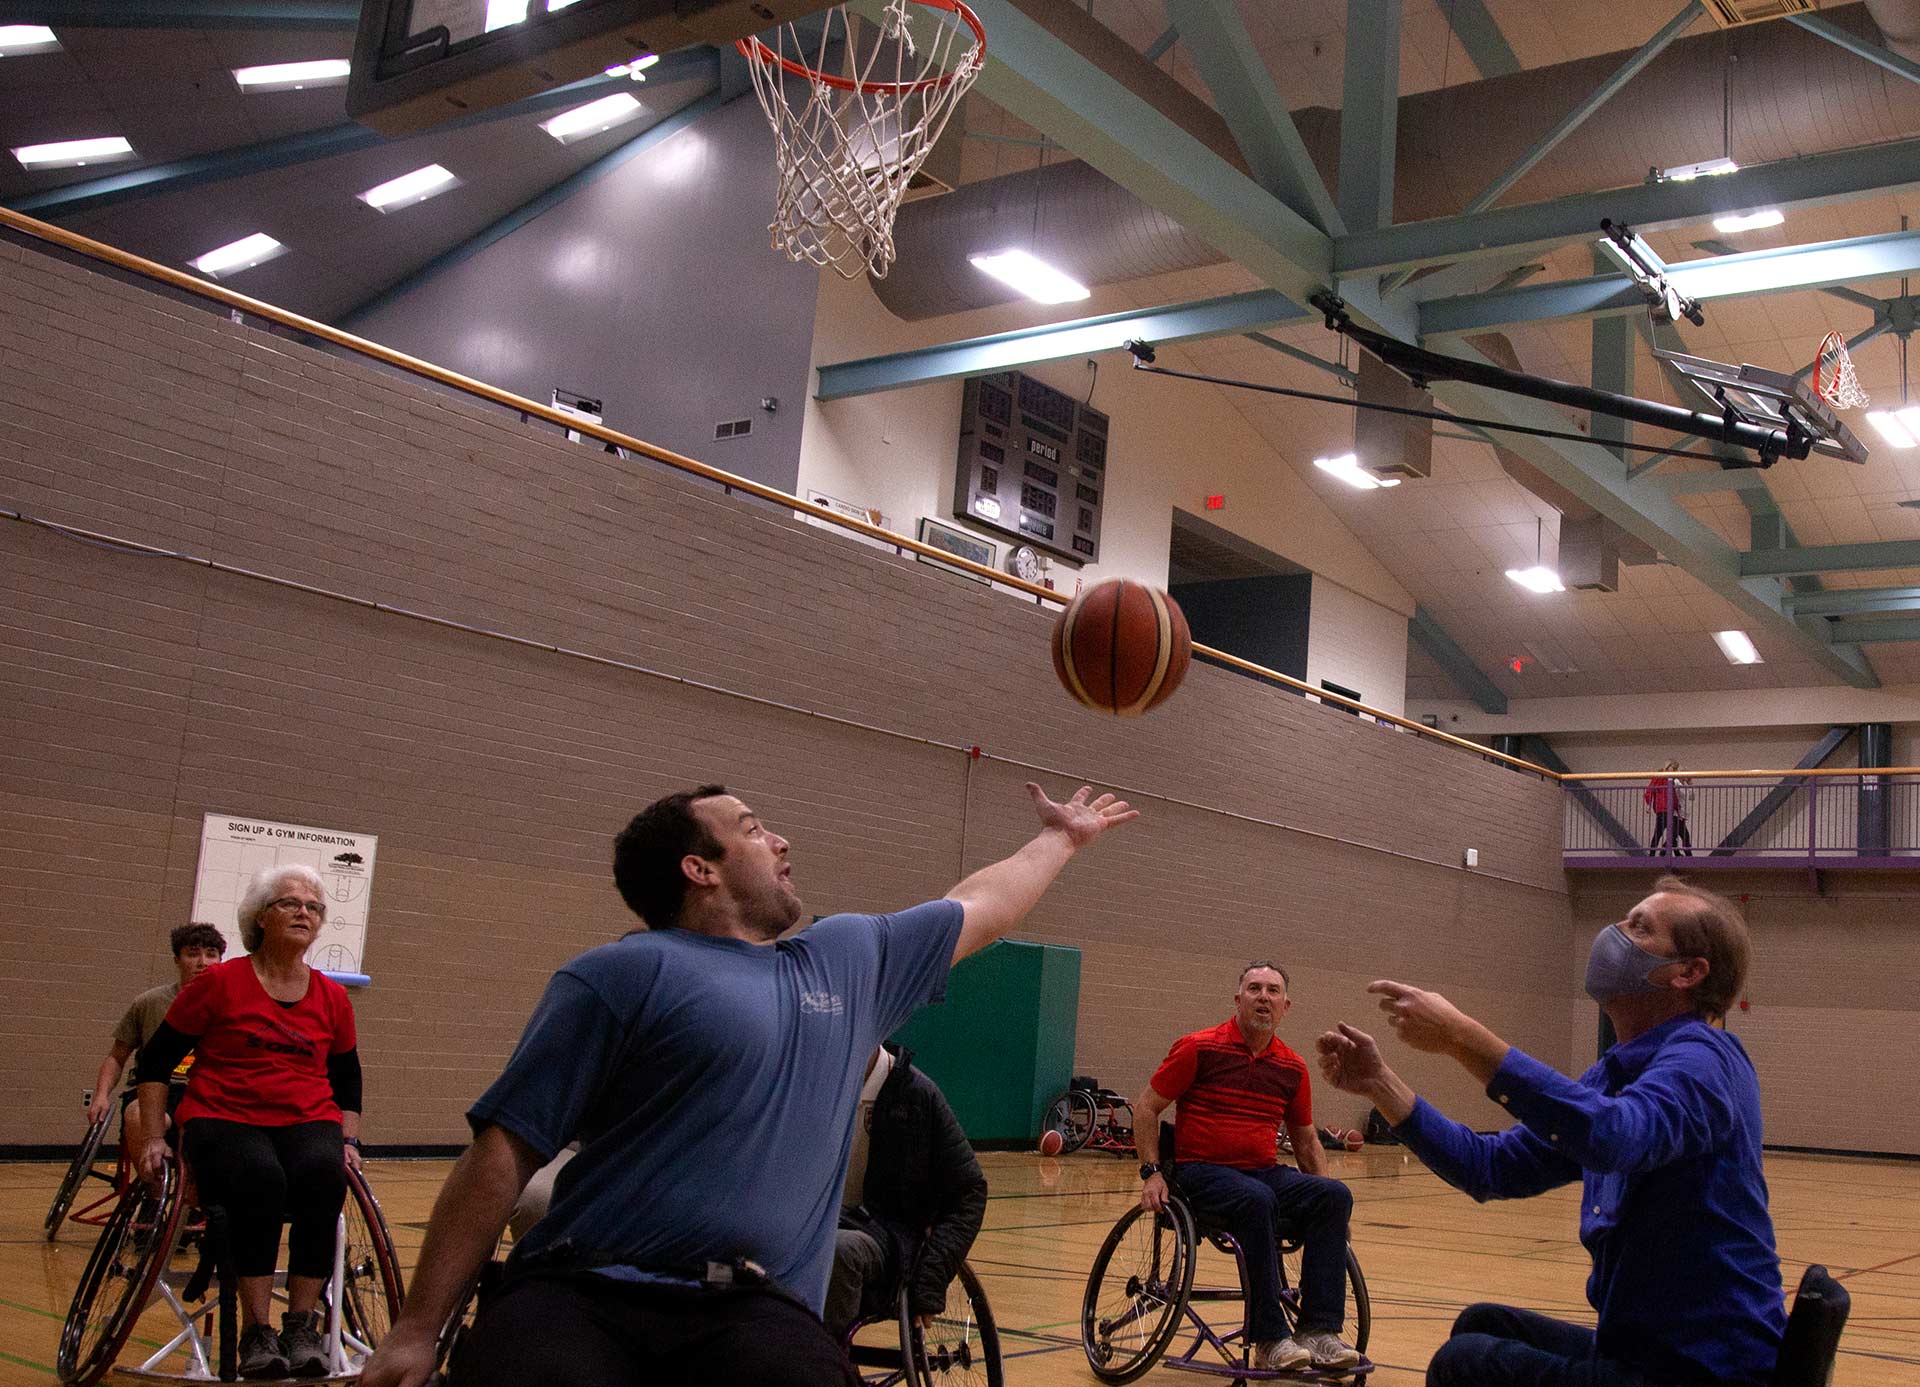 An attendee is attempting to block a basketball from scoring mid-air at Tucson's first Disability Pride Celebration in Udall Park on Saturday, Dec. 3, 2022. Southern Arizona Adaptive Sports brought in wheelchairs as well as other equipment for Tucsonans to try adaptive sports for the first time. 